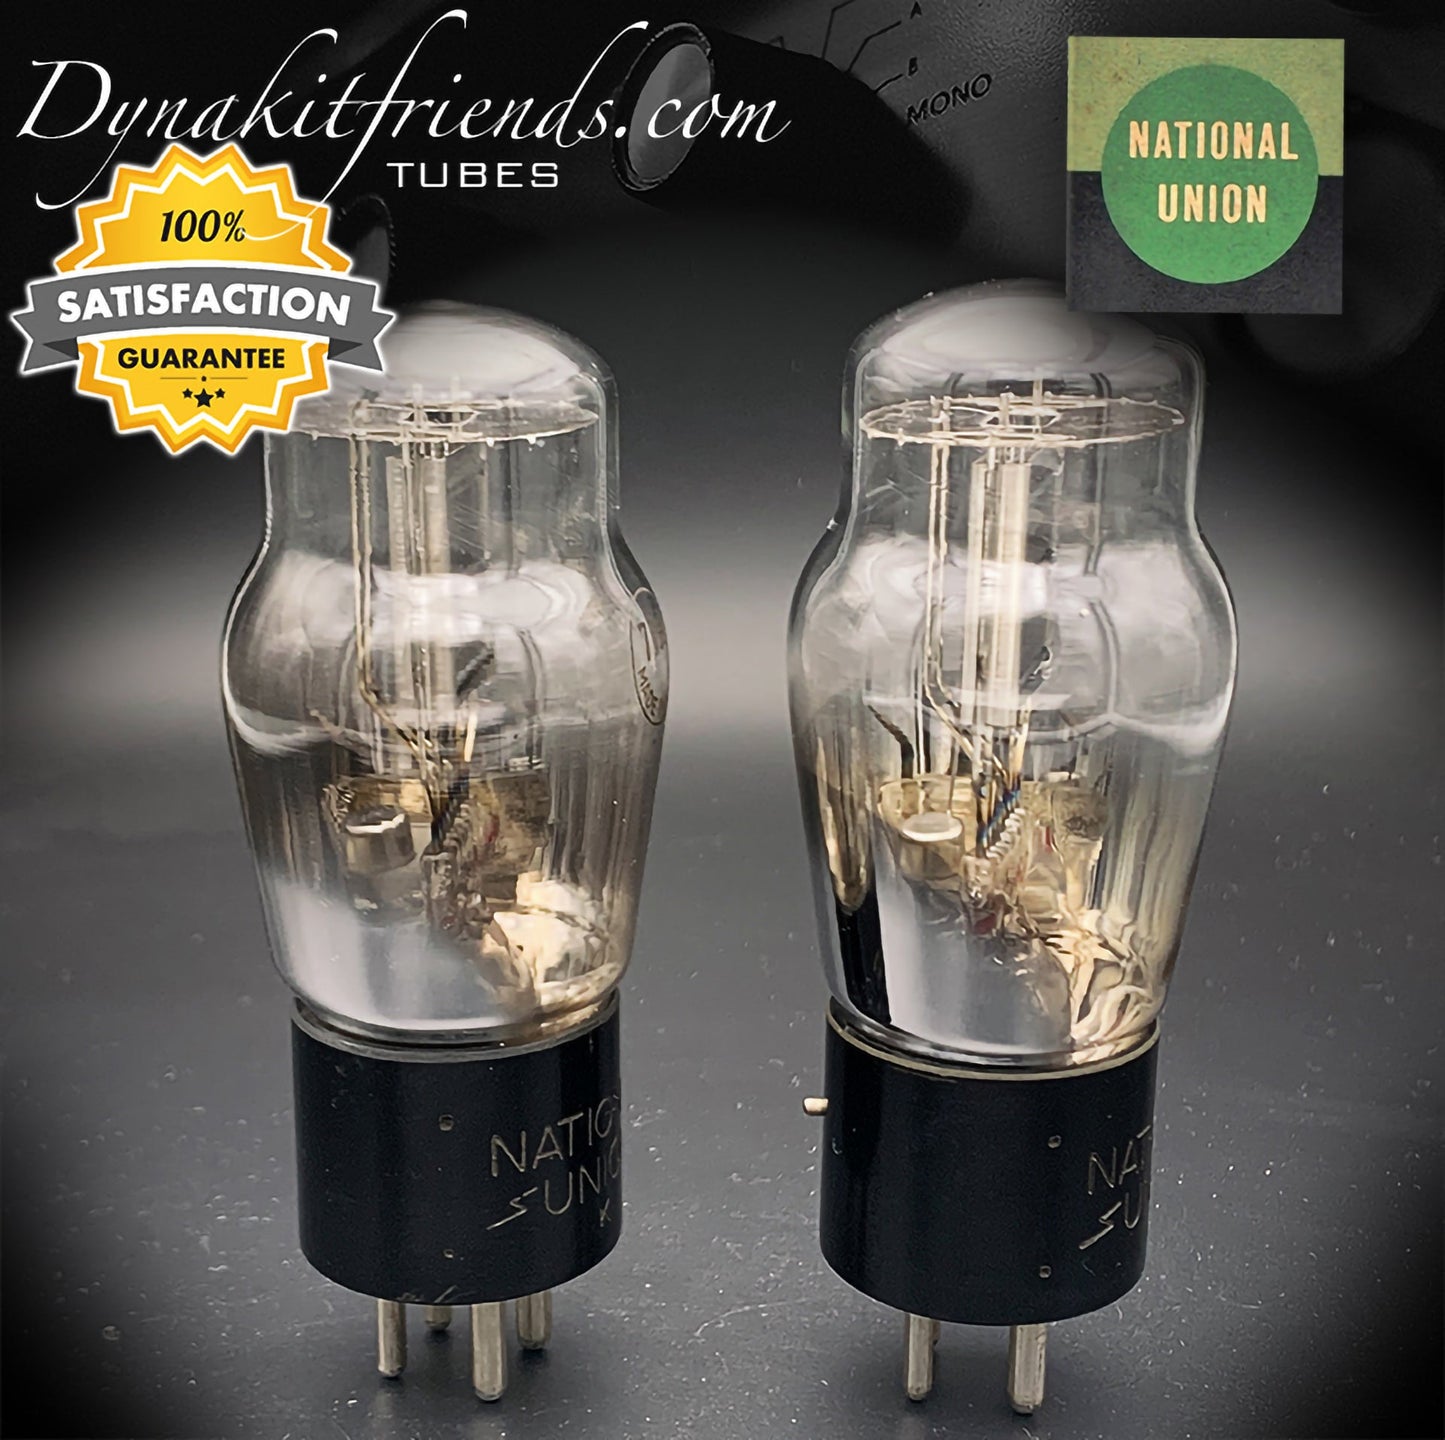 71A ST NOS NATIONAL UNION Power Triode Matched Pair Tubes Made In USA